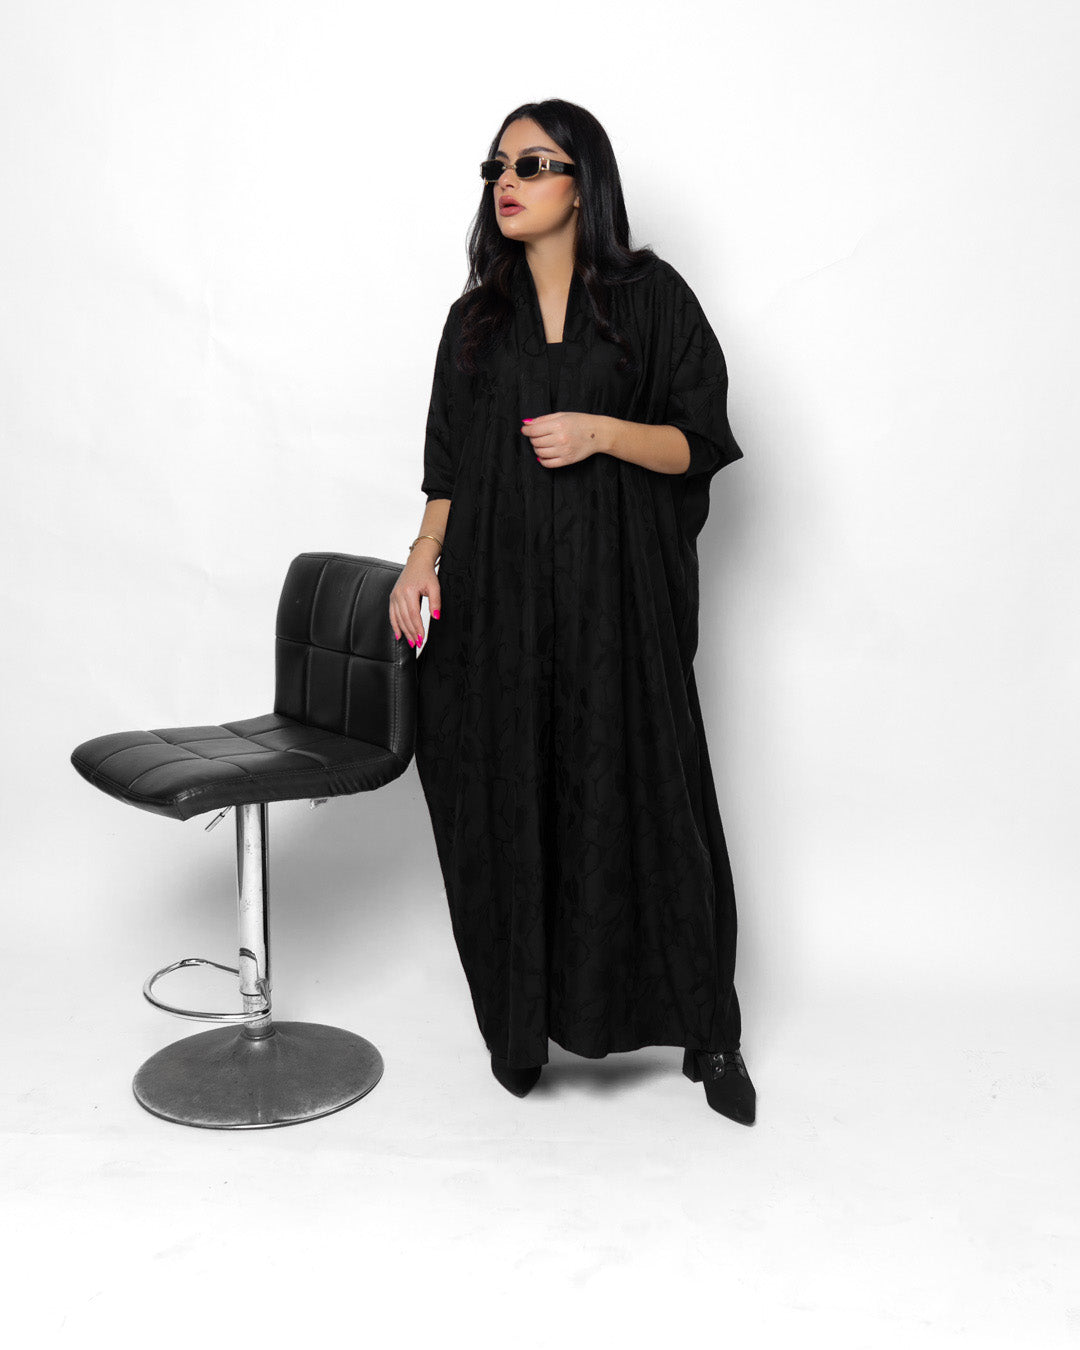 BL-0185 Abaya wide model, Black colour with designs